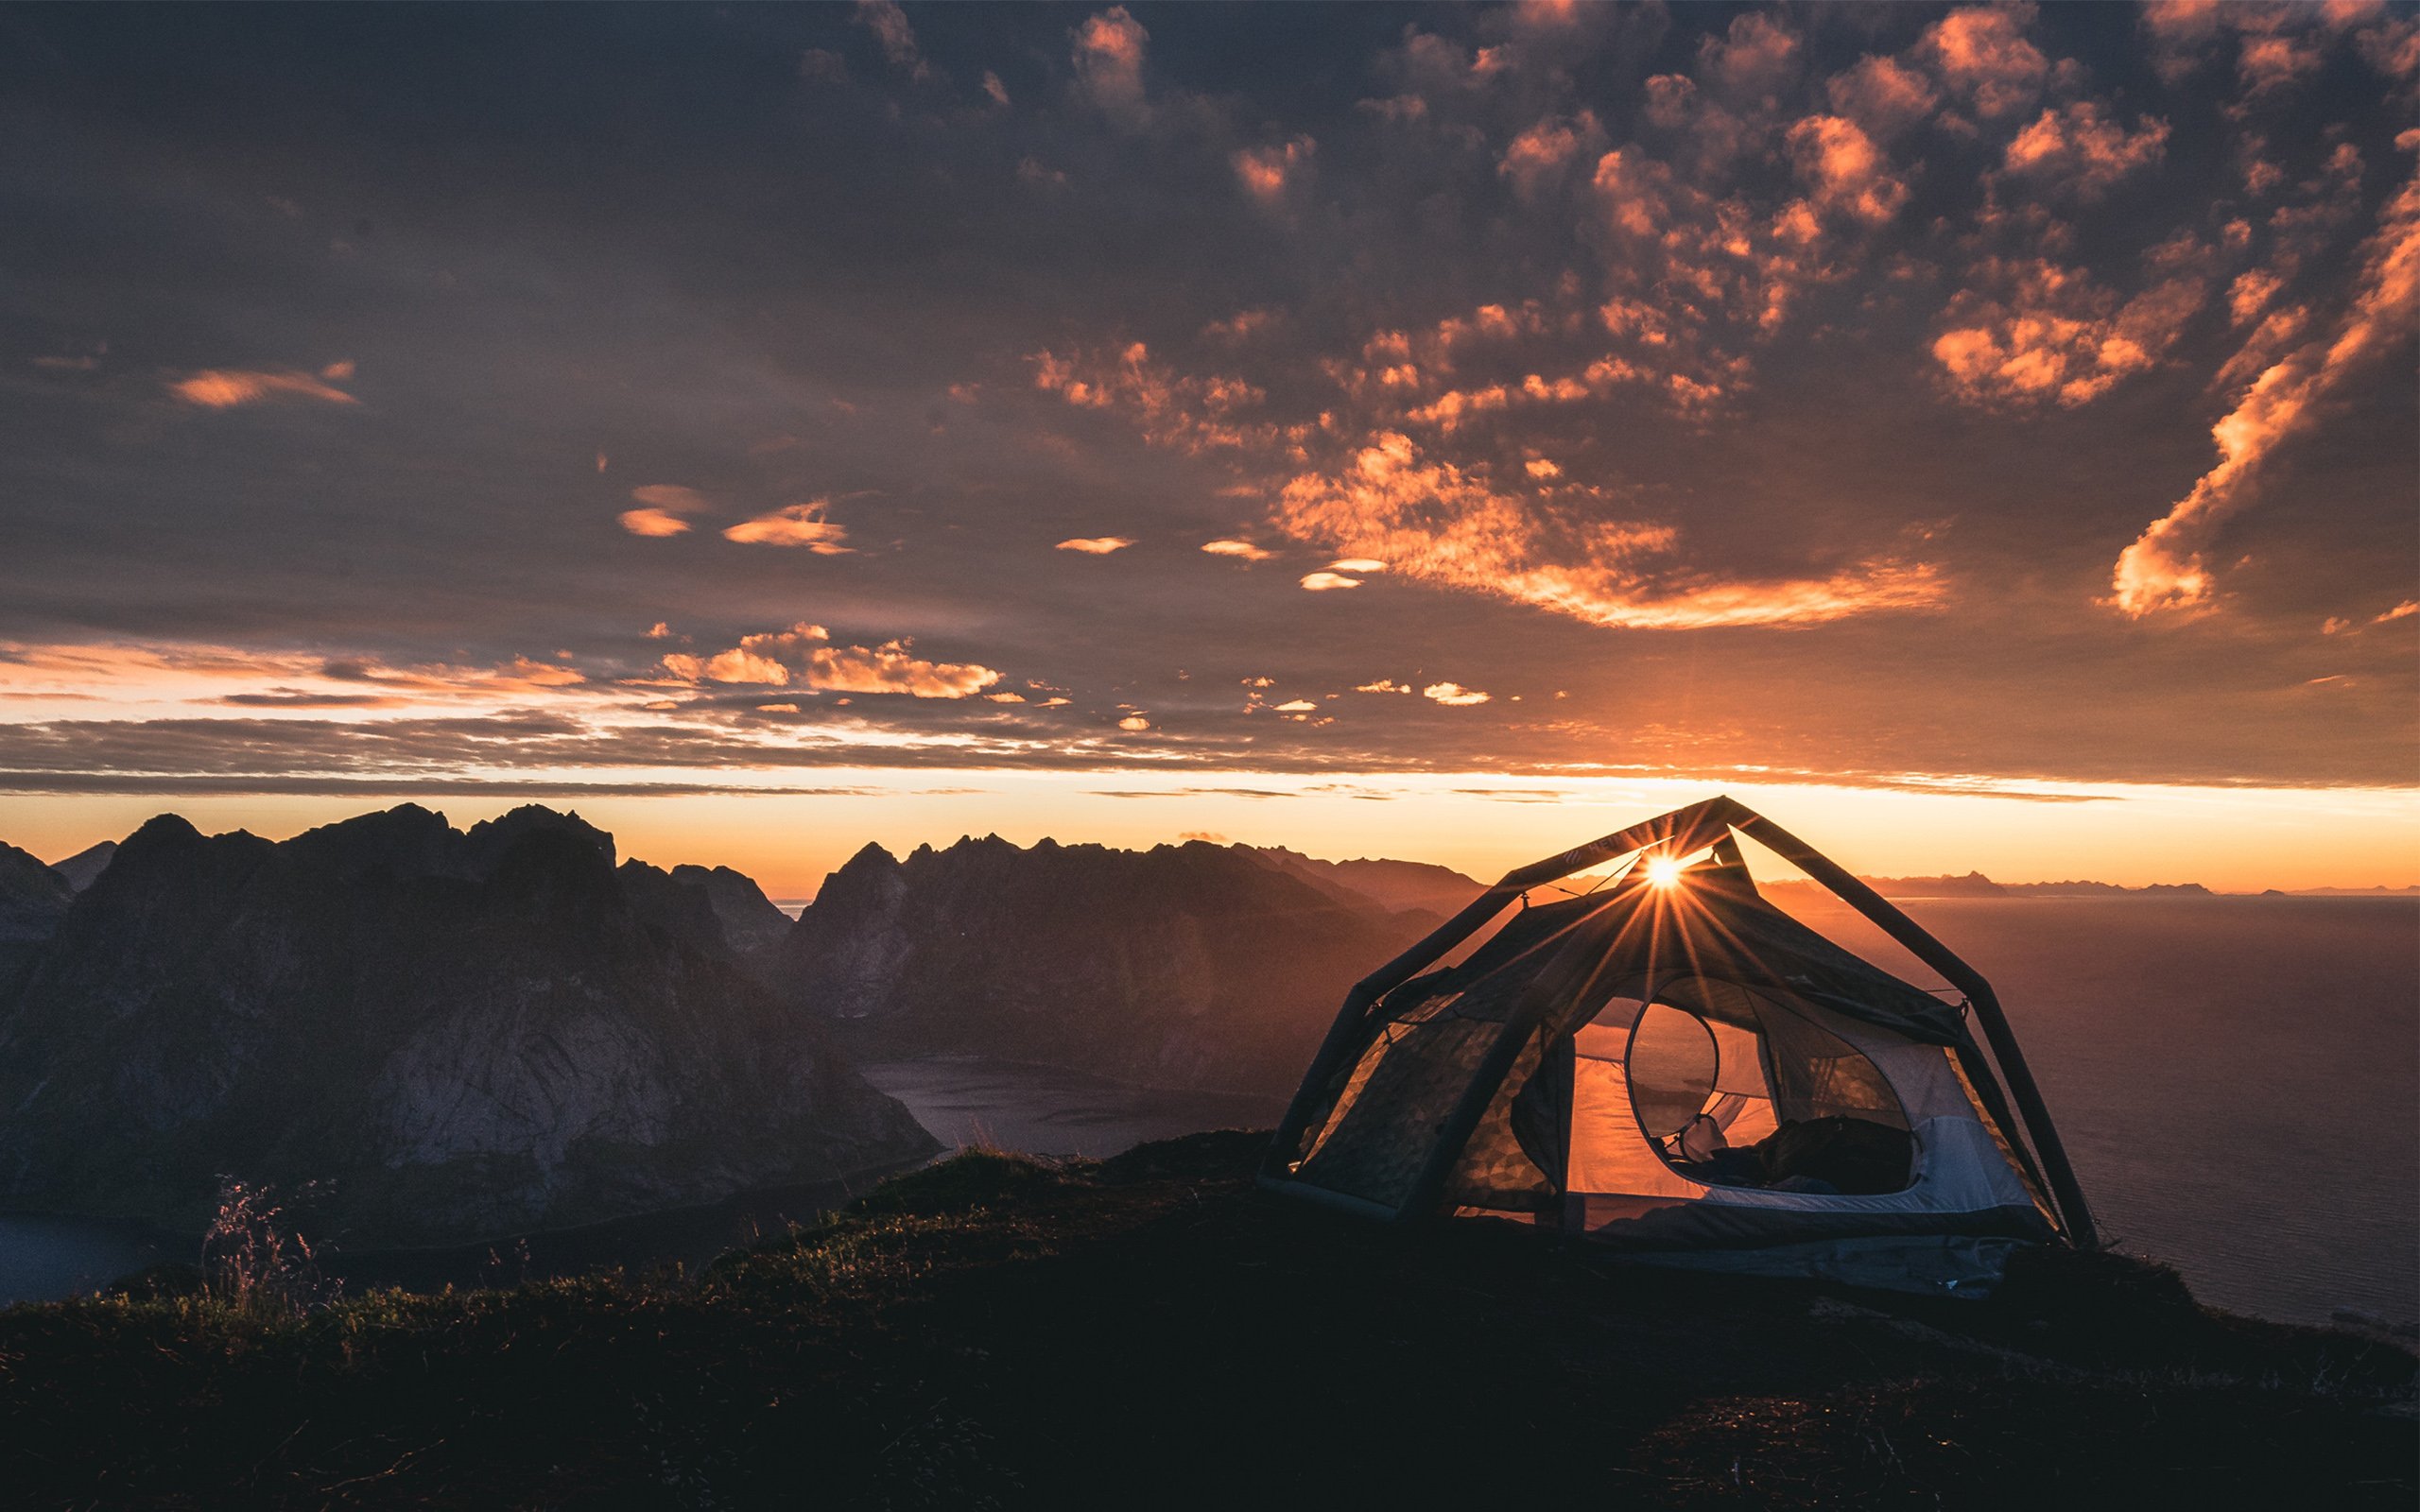 #sun rays, #camping, #photography, #mountains, #tent